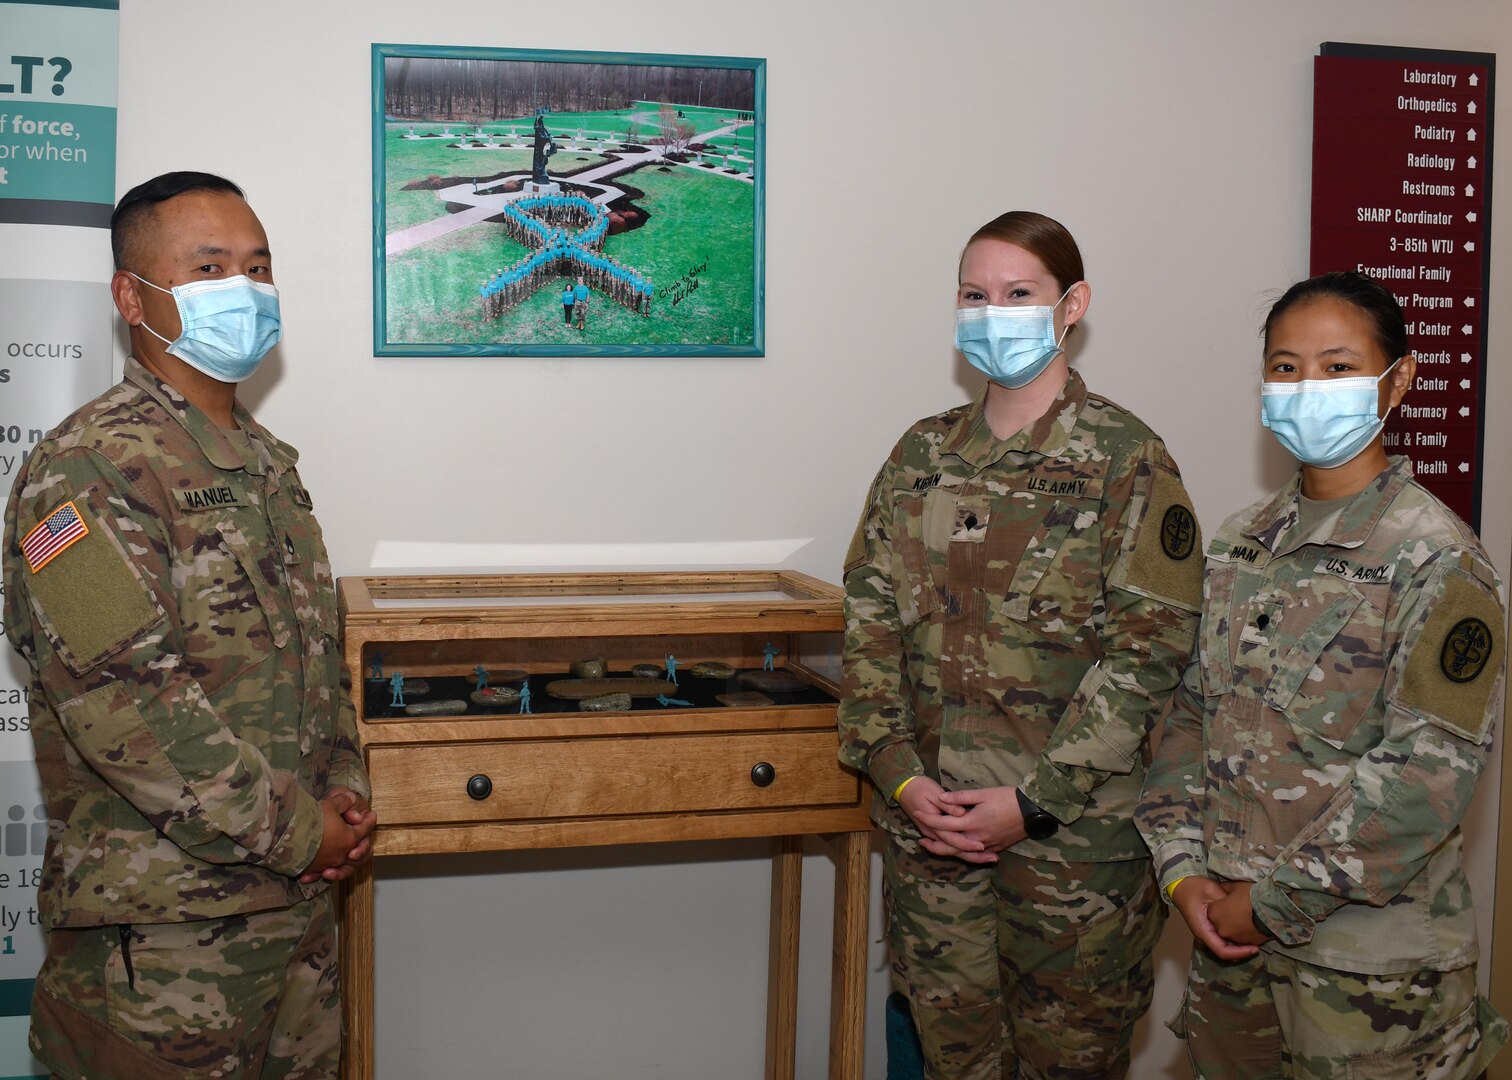 (From left to right) Staff Sgt. Dennis Manuel, primary care noncommissioned officer; Spc. Marissa Kirian, NCO in charge of OB/GYN; and Spc. Kelly Pham, laboratory medical specialist, stand in front of the Fort Drum Medical Activity’s Sexual Harassment and Assault Response and Prevention display at the Guthrie Army Medical Home on Fort Drum, N.Y. Sept. 23, 2020.  Manuel, Kirian and Kelly recently received training as Sexual Assault Medical Forensic Examiner (SAMFE) assists.  Under the new pilot program, the volunteer Soldiers will now be on call to assist with medical exams, collect forensic evidence, and support victims during sexual assault forensic exams (SAFE).